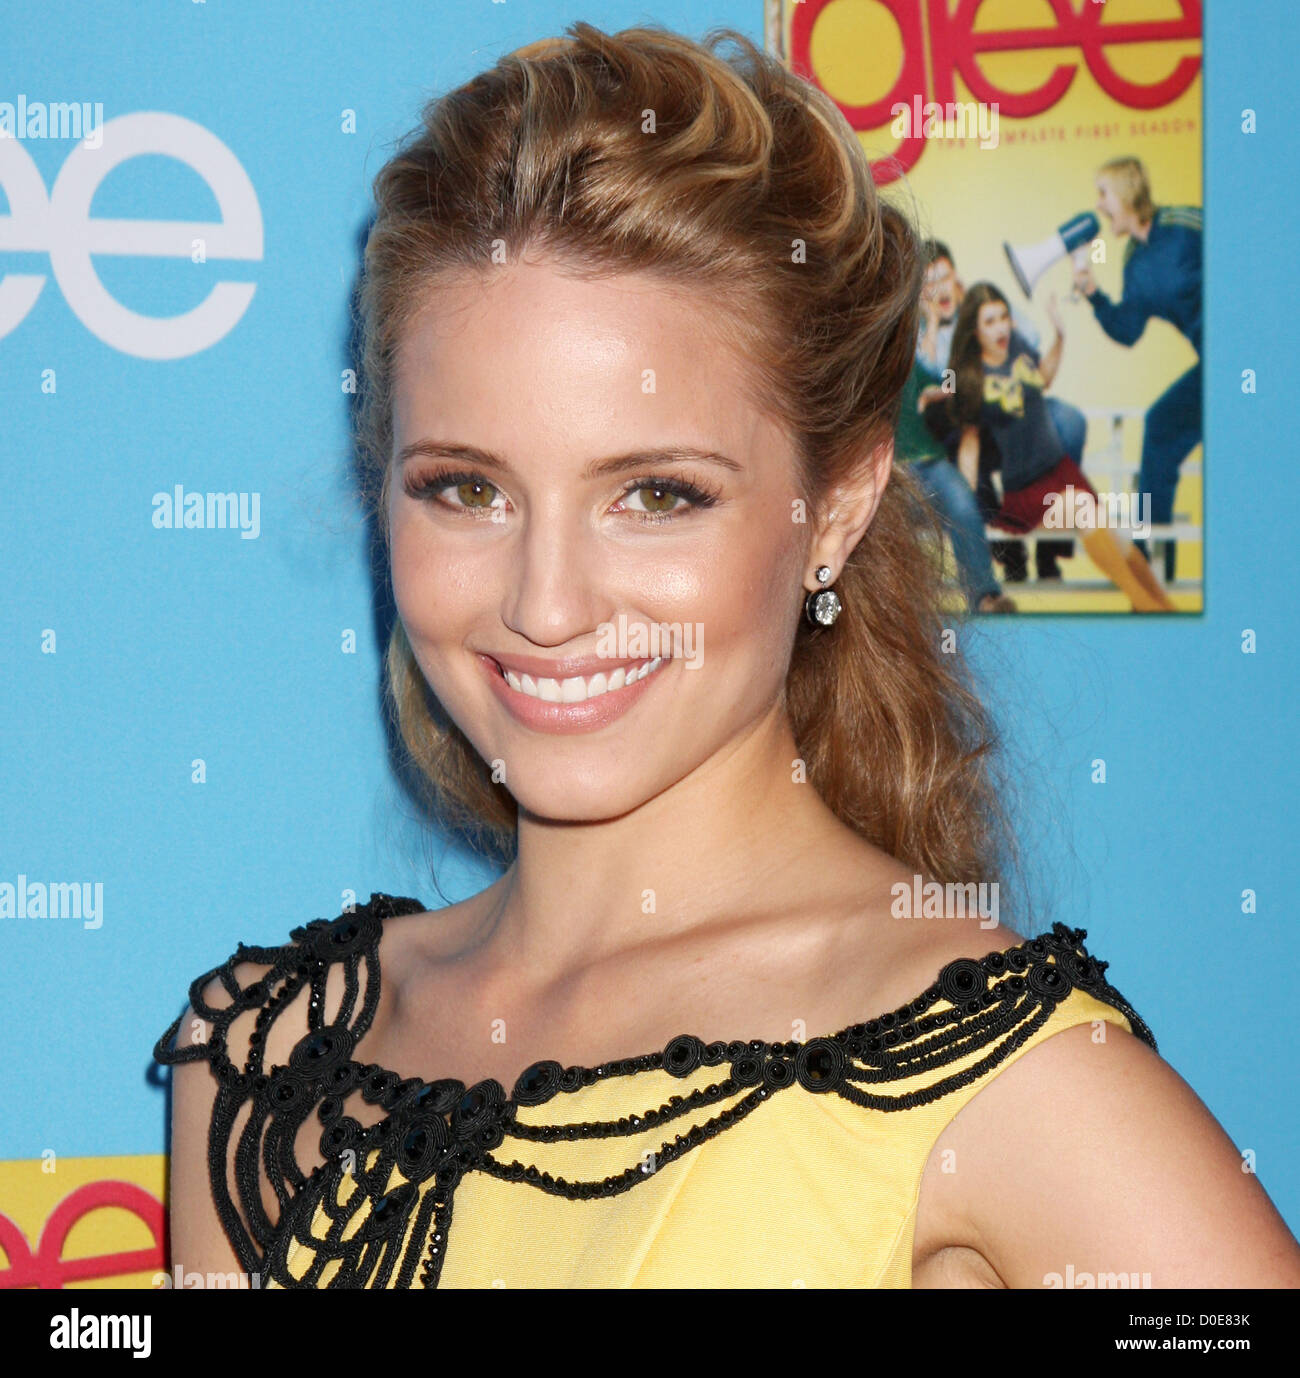 Dianna Agron The 'Glee: Season 2' premiere and DVD release party held at Paramount Studios Los Angeles, California - 07.09.10 Stock Photo